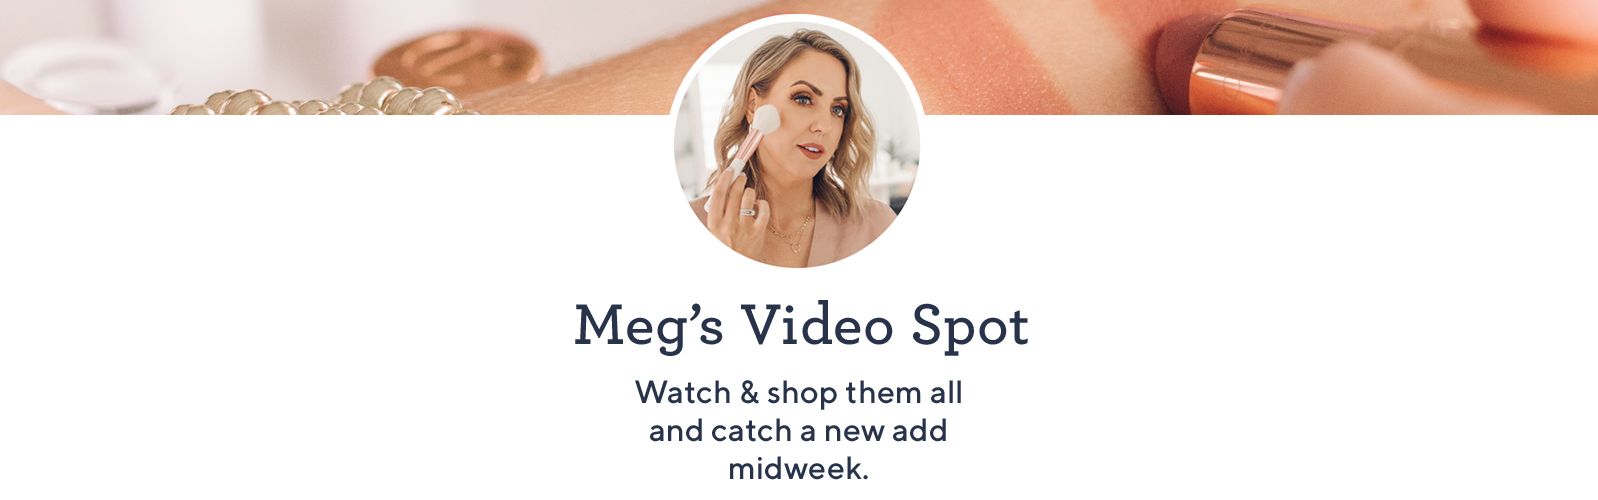 Meg’s Video Spot. Watch & shop them all and catch a new add midweek.